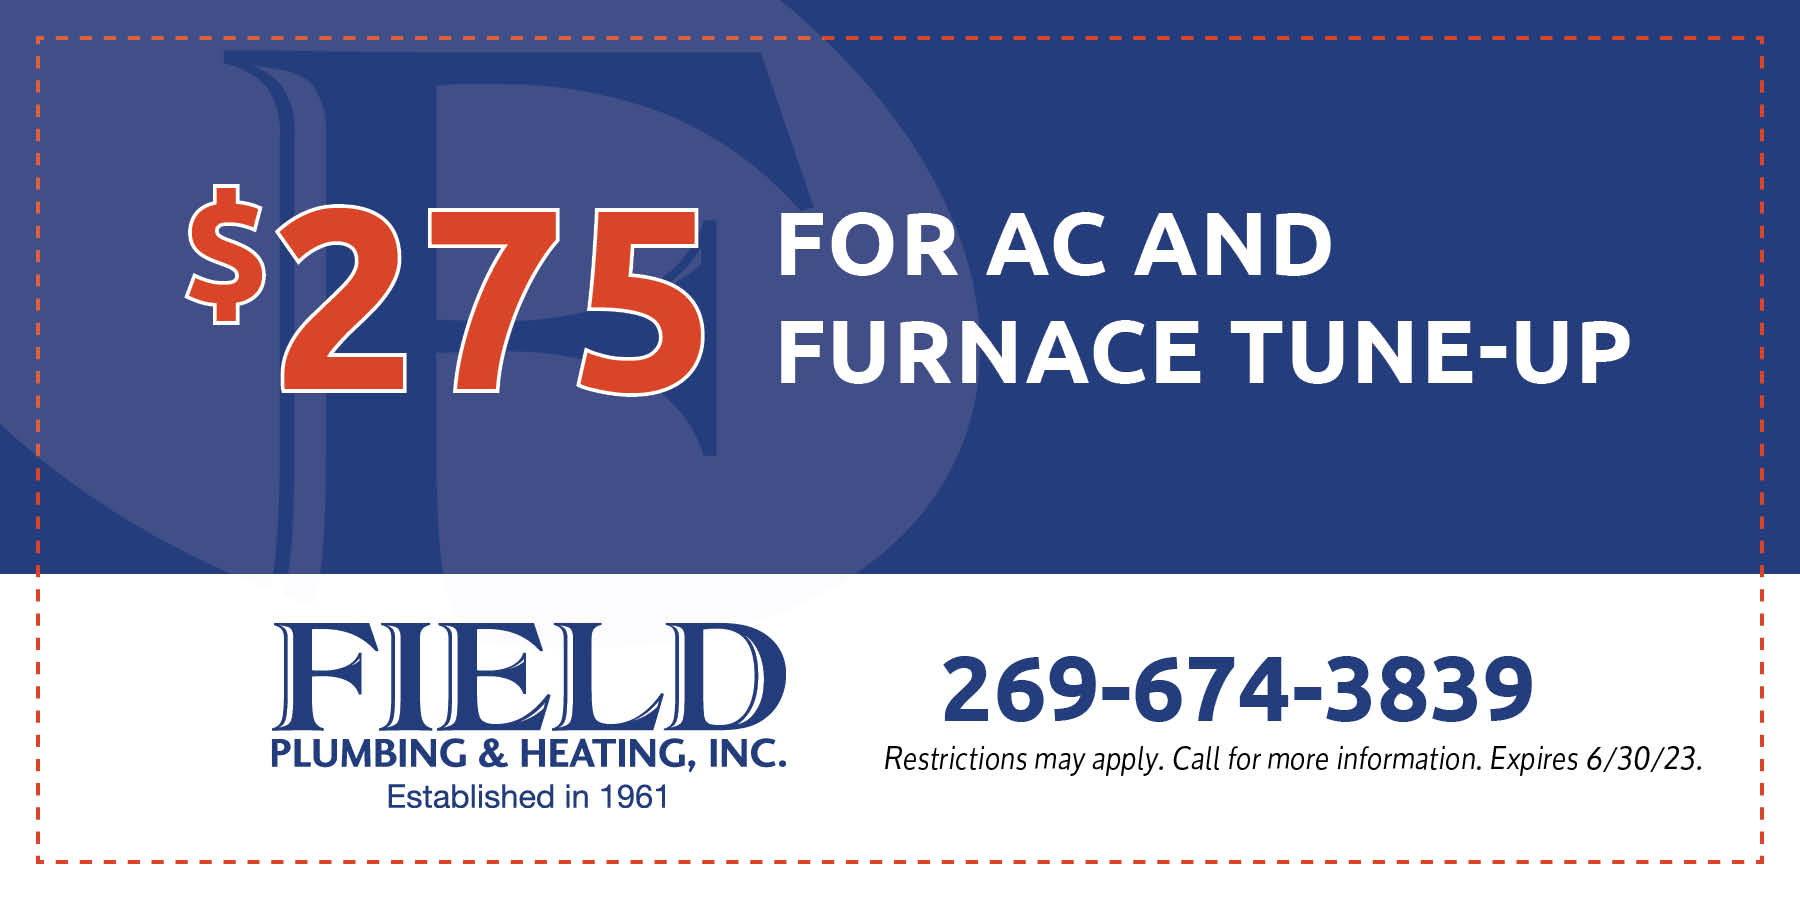 $275 FOR AC AND FURNACE TUNE-UP. Expires 6/30/23.